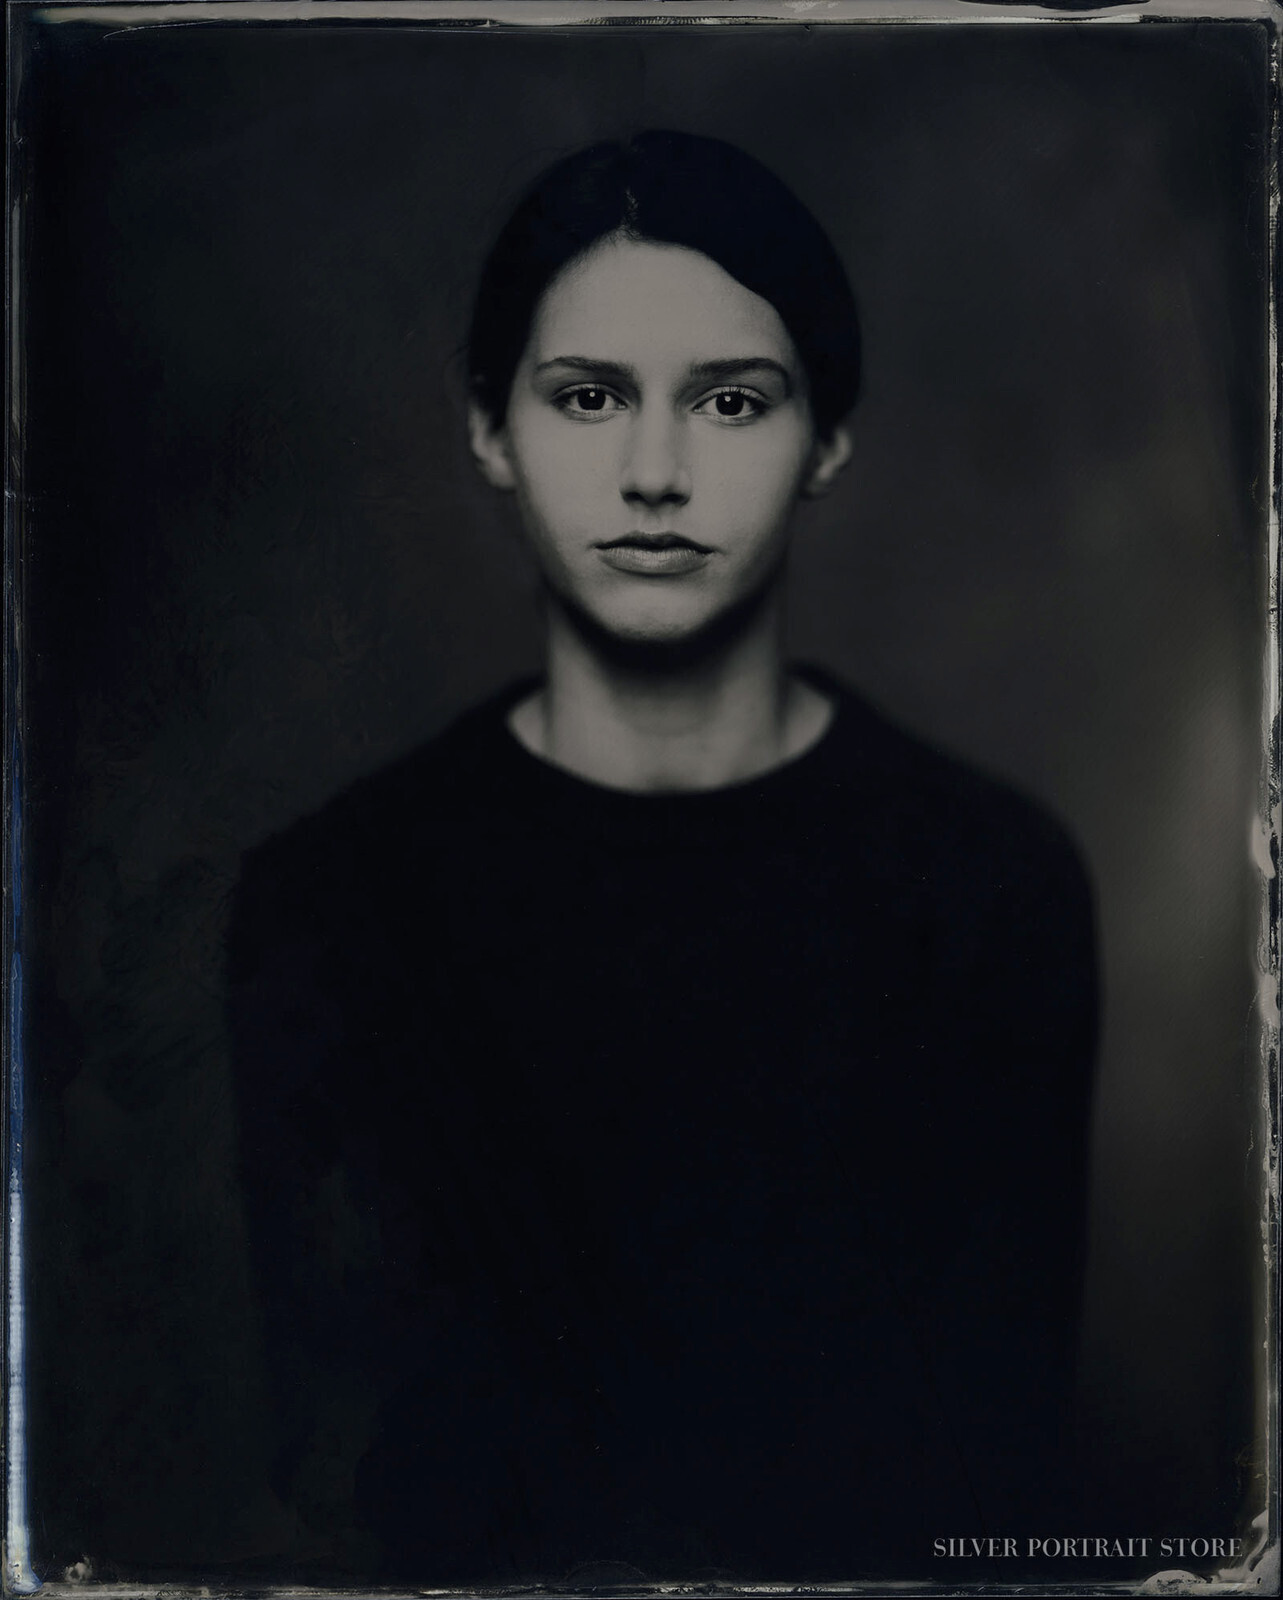 Tessa-Silver Portrait Store-scan from Wet plate collodion-Black glass Ambrotype 20 x 25 cm.